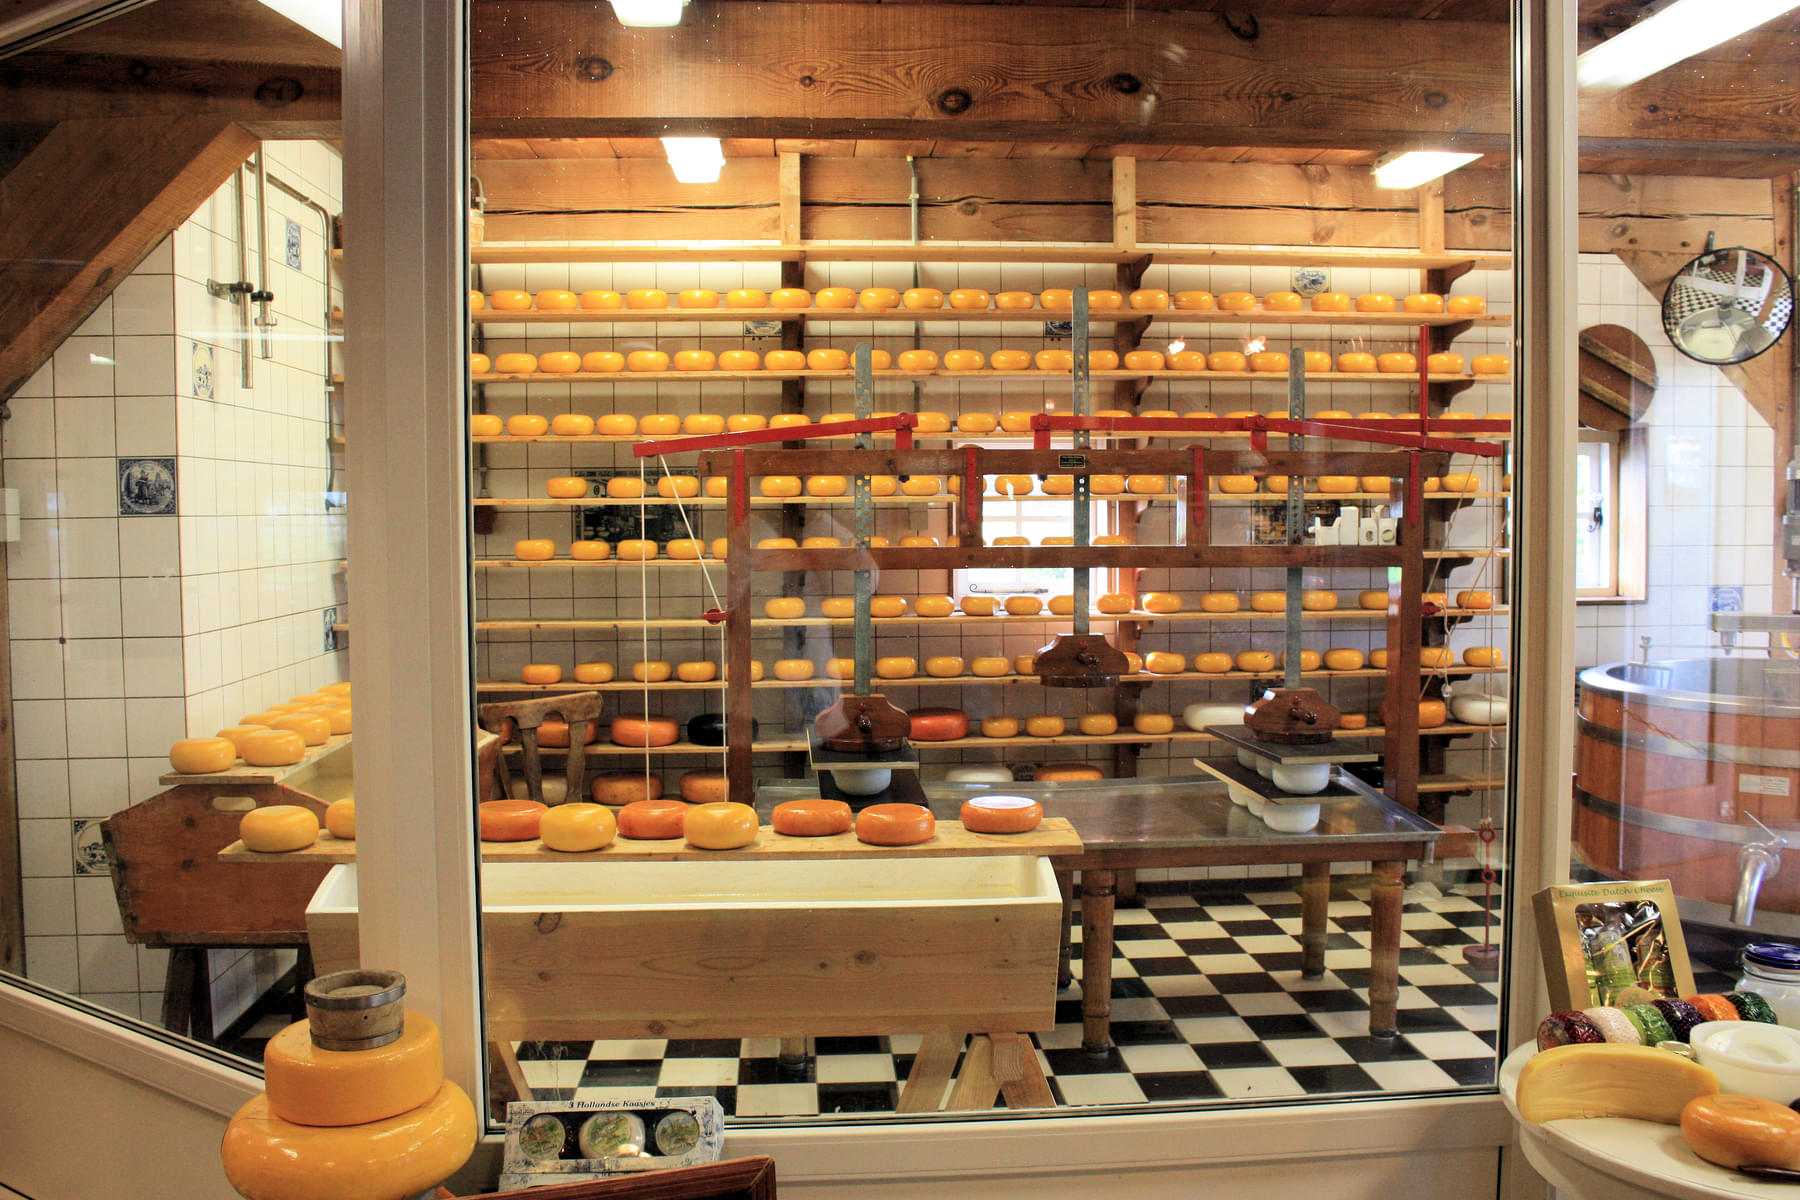 Visit the cheese shop and have a fun-packed tour